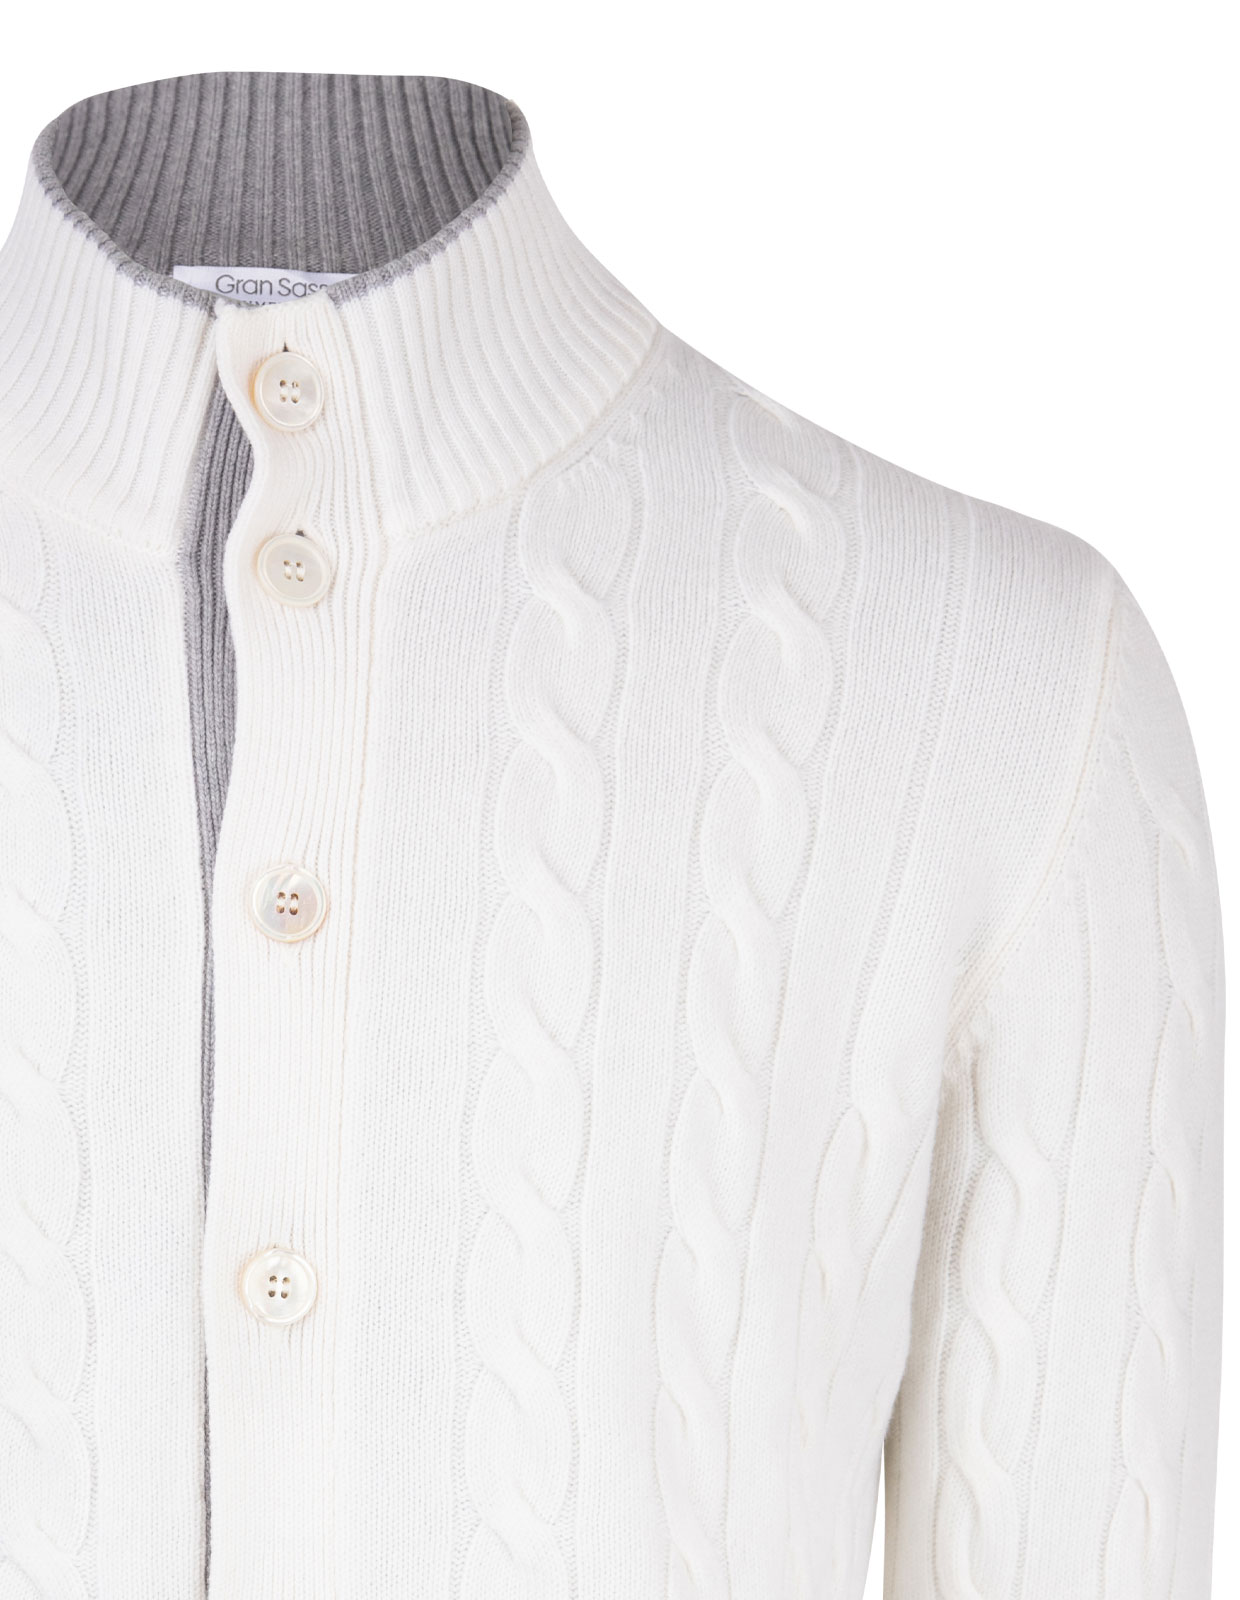 Full Button Cable Cardigan Wool & Cashmere White Stl 56